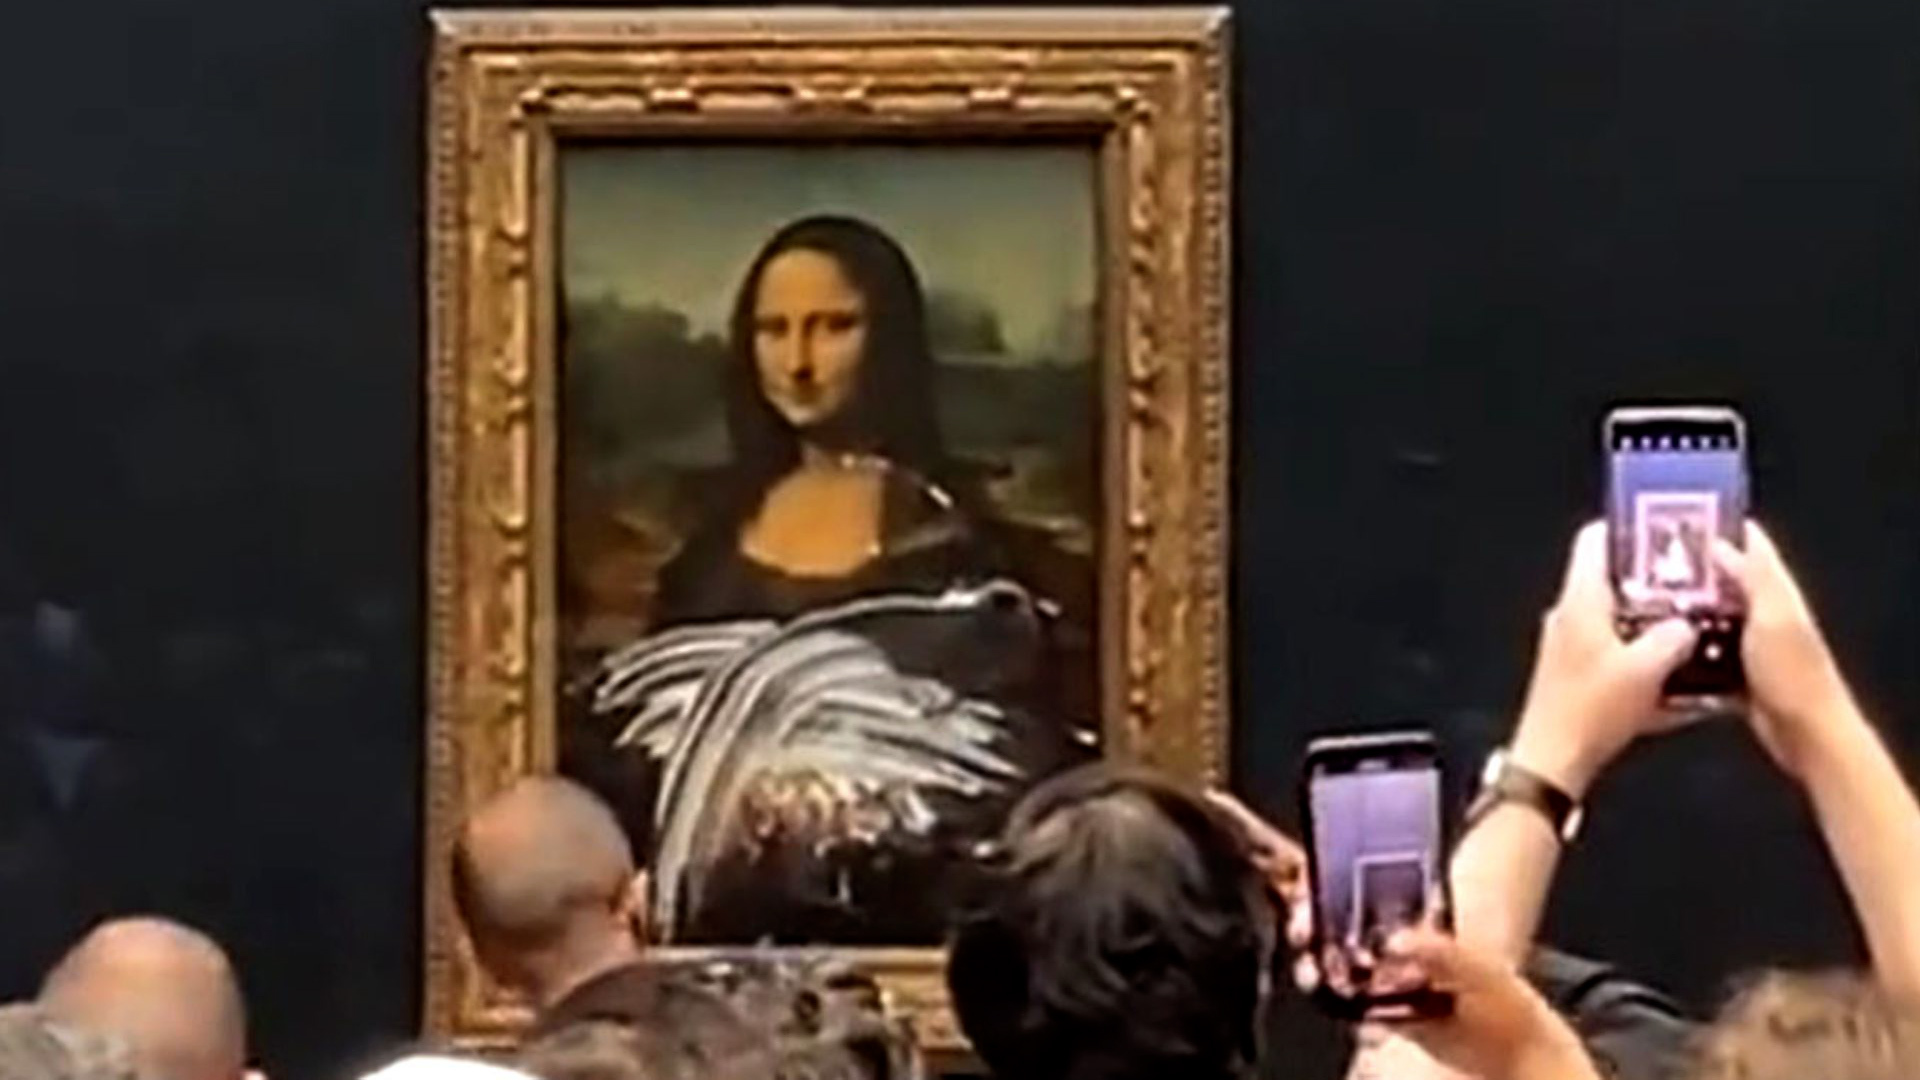 Monalisa Hotsex - Mona Lisa gets caked by man disguised as old woman at the Louvre | Marca